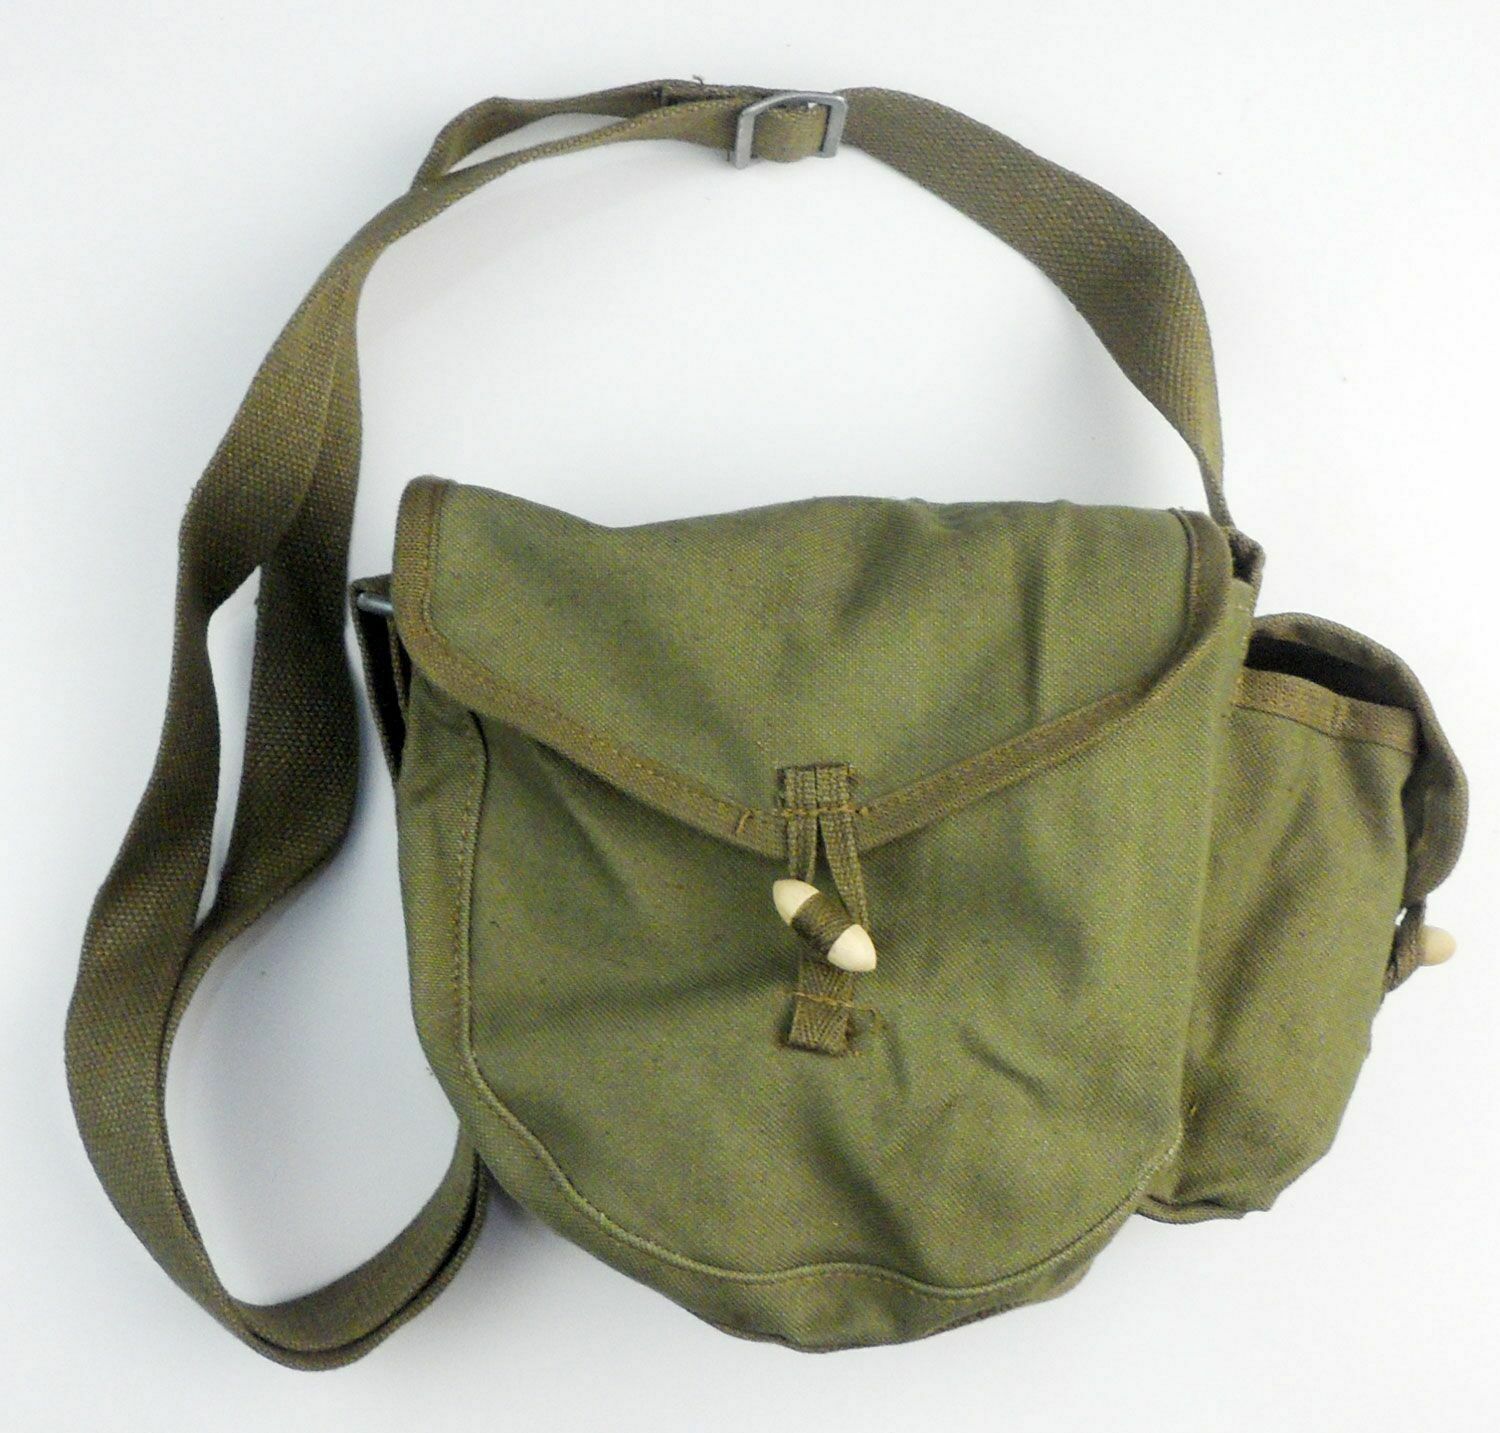 Primary image for Chinese army canvas drum ammo pouch bag PLA military ammunition communist soviet